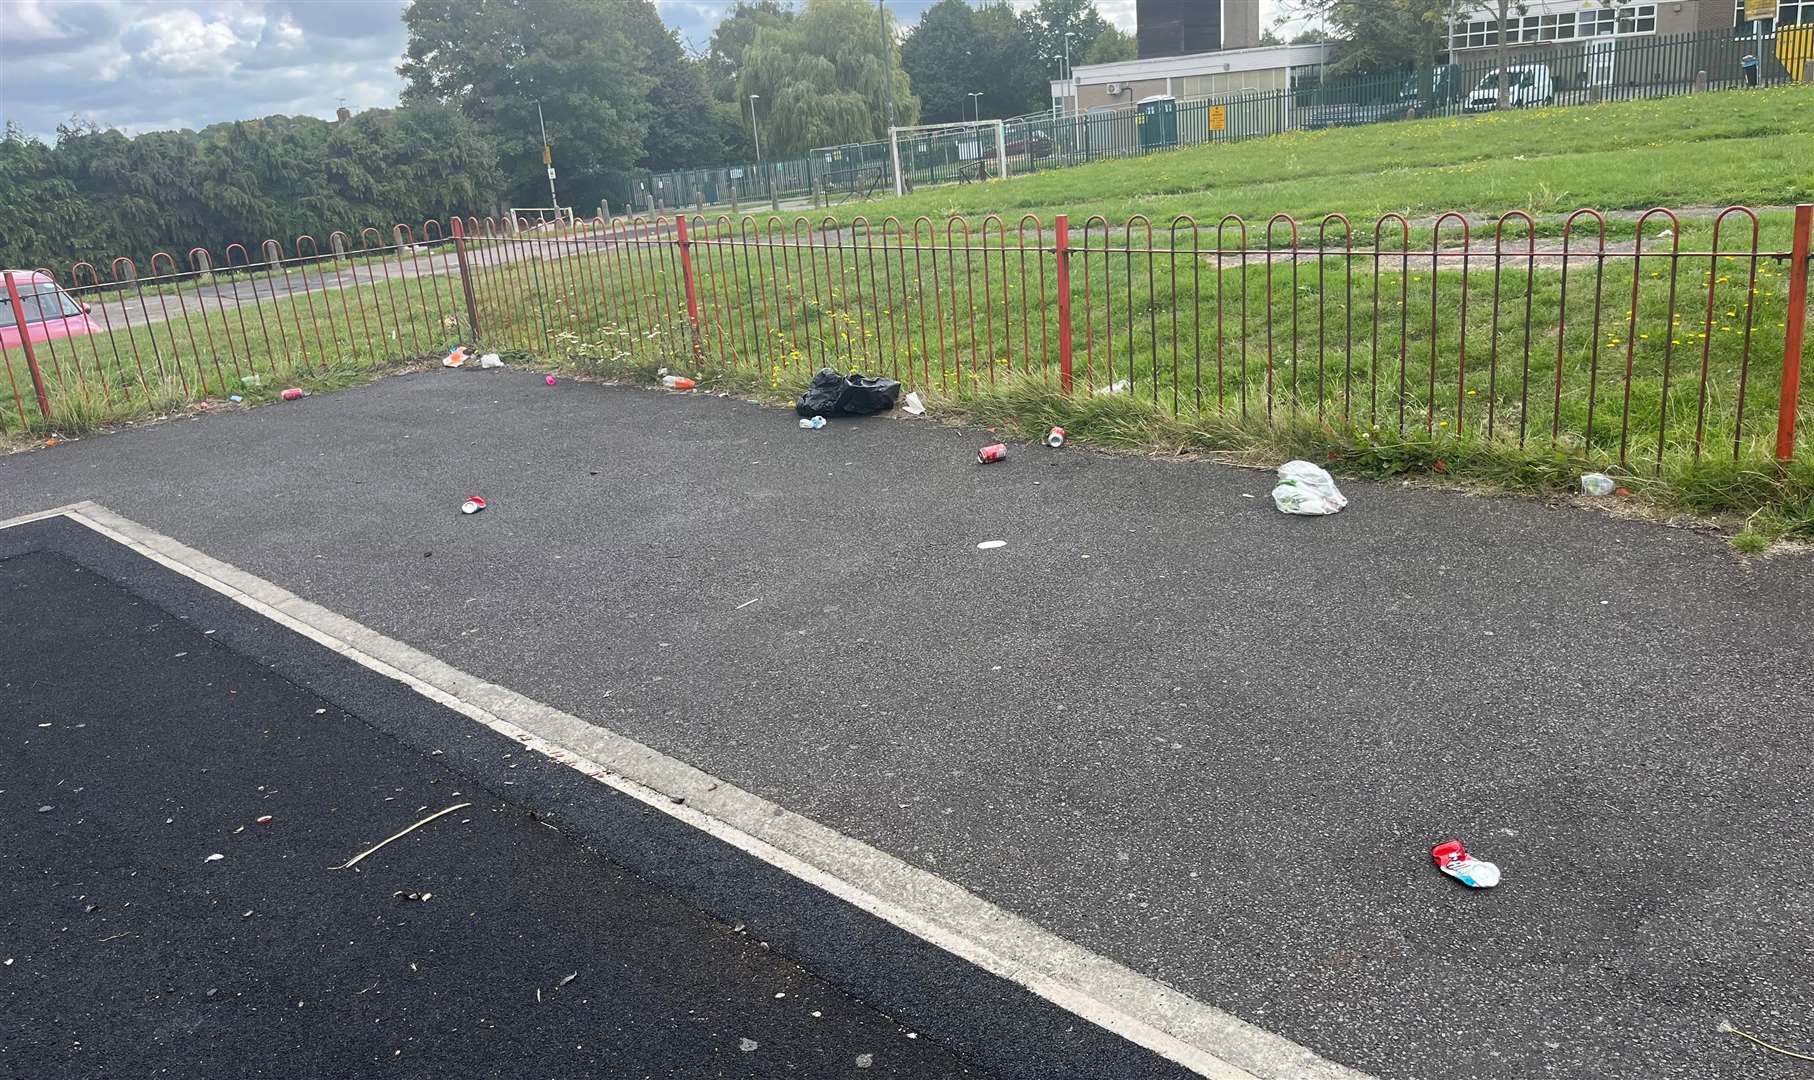 Rubbish has also been left in the play park